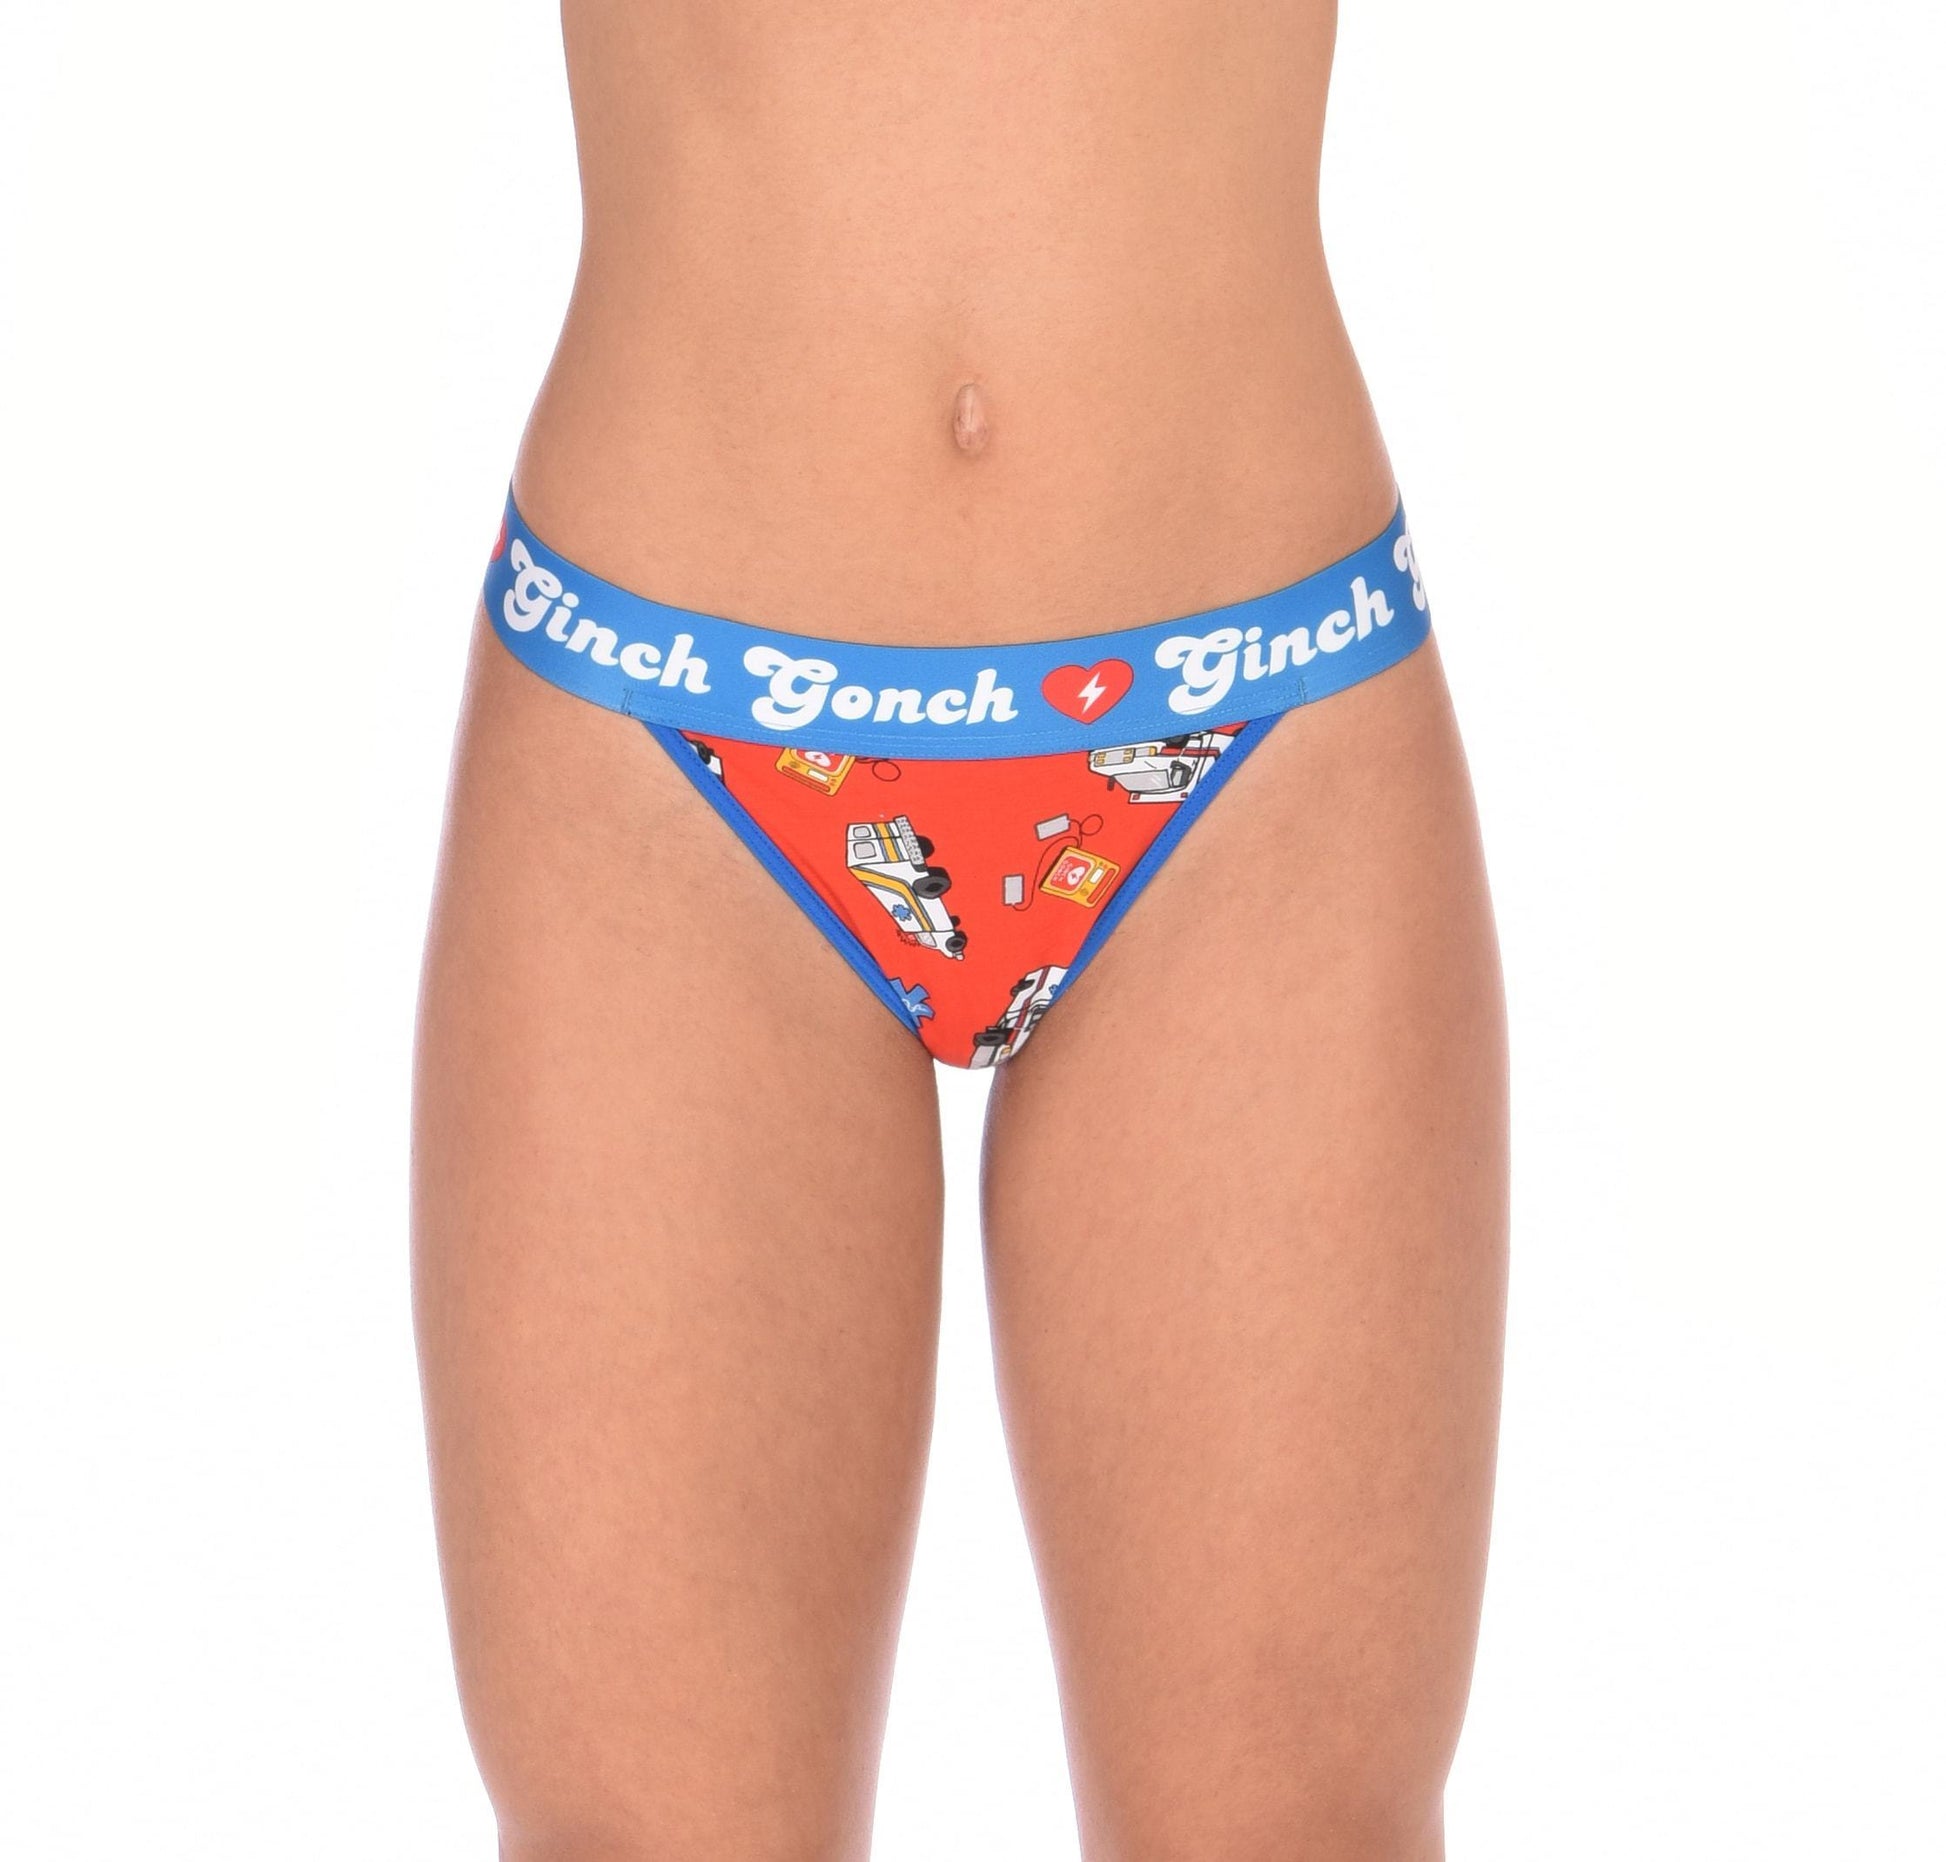 Ginch Gonch GG EMT thong women's ambulance print with medical symbol and equipment on red background with blue trim and printed waistband front